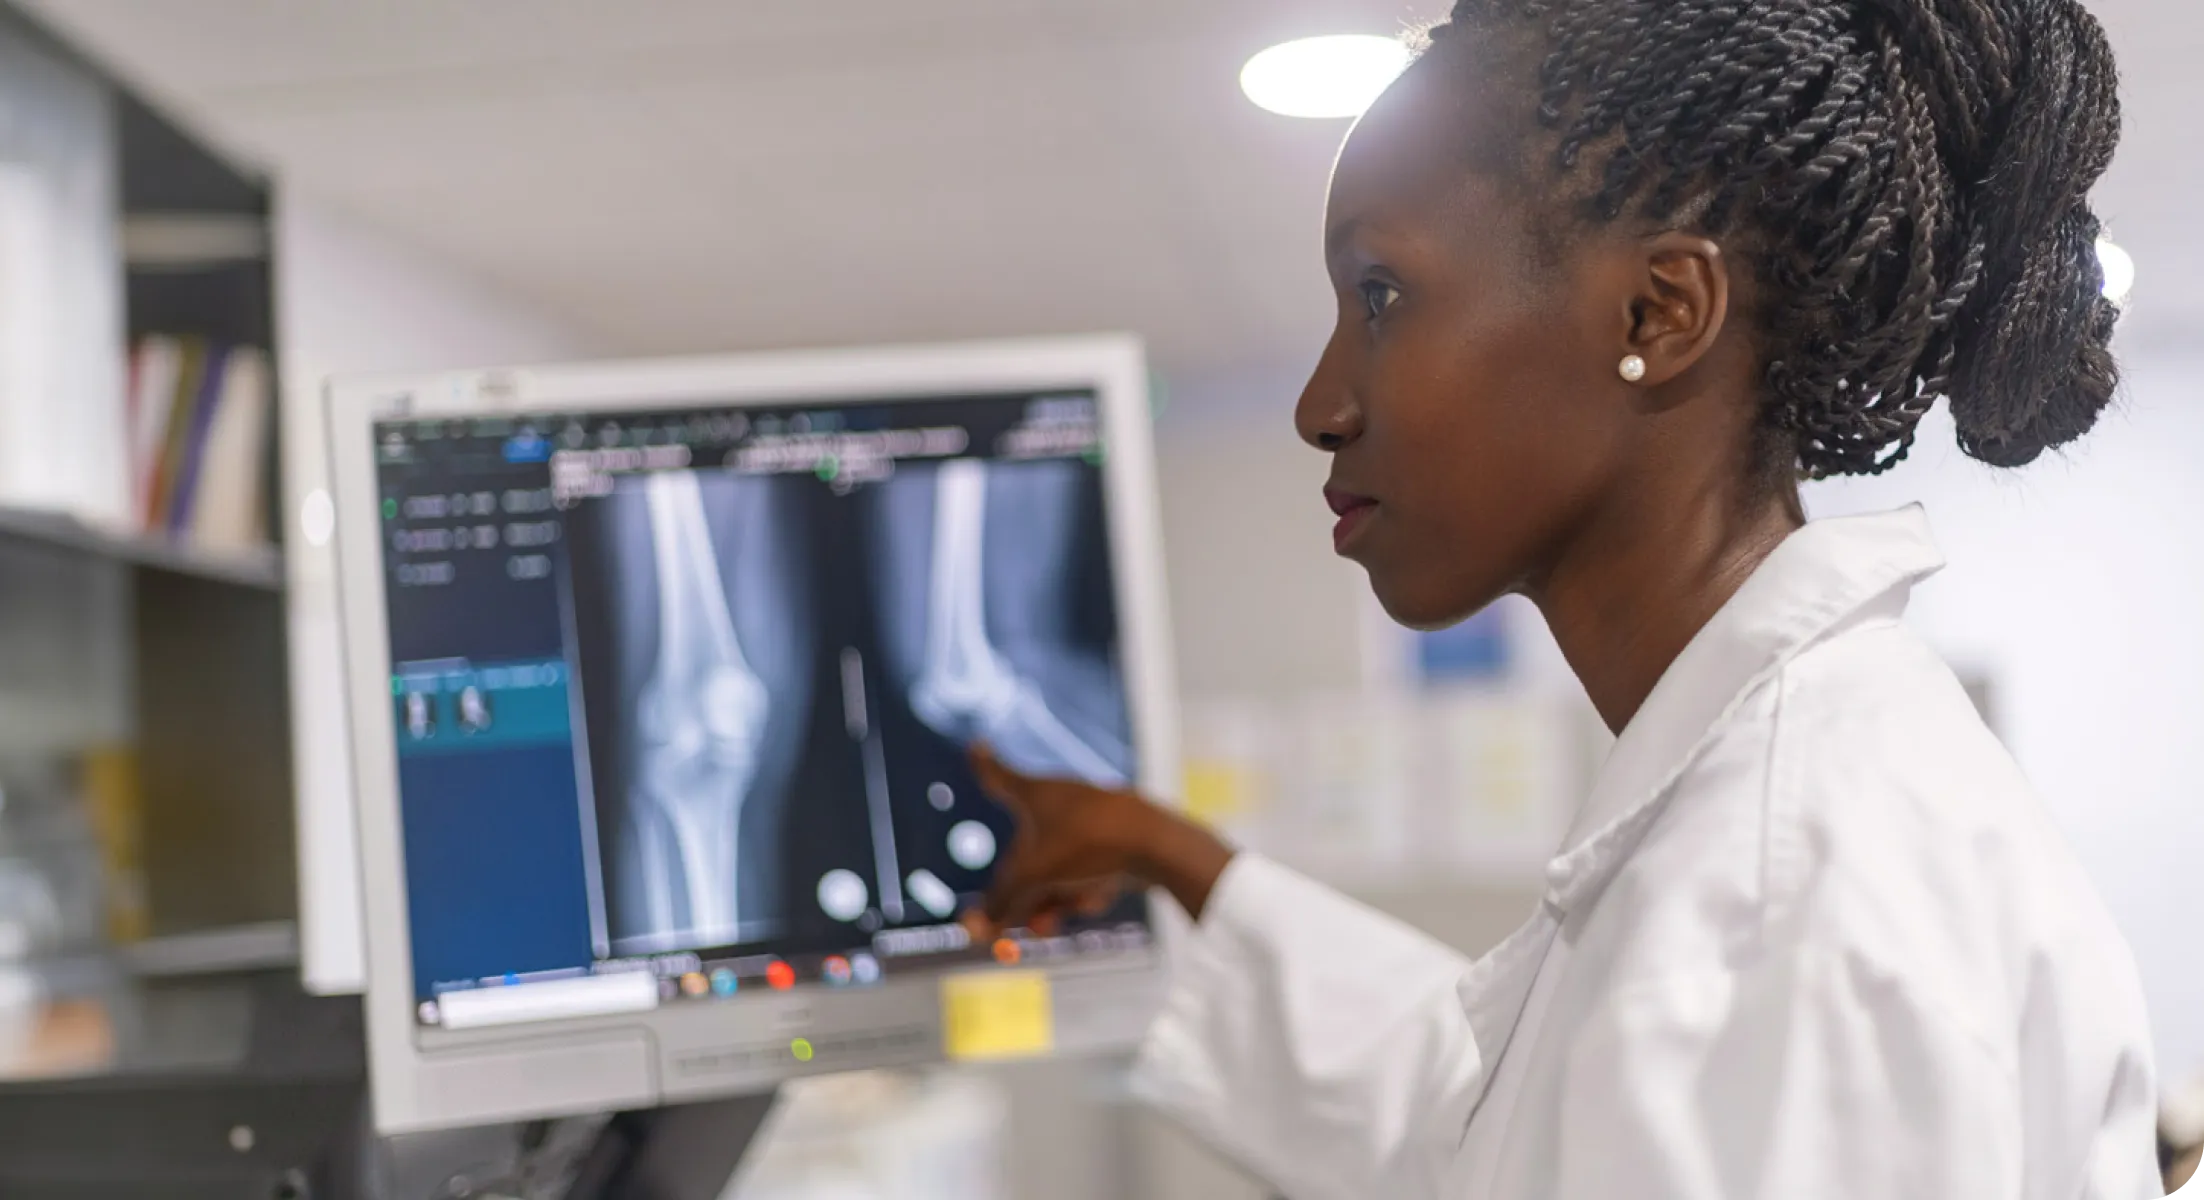 A healthcare professional focuses on X-Ray imaging